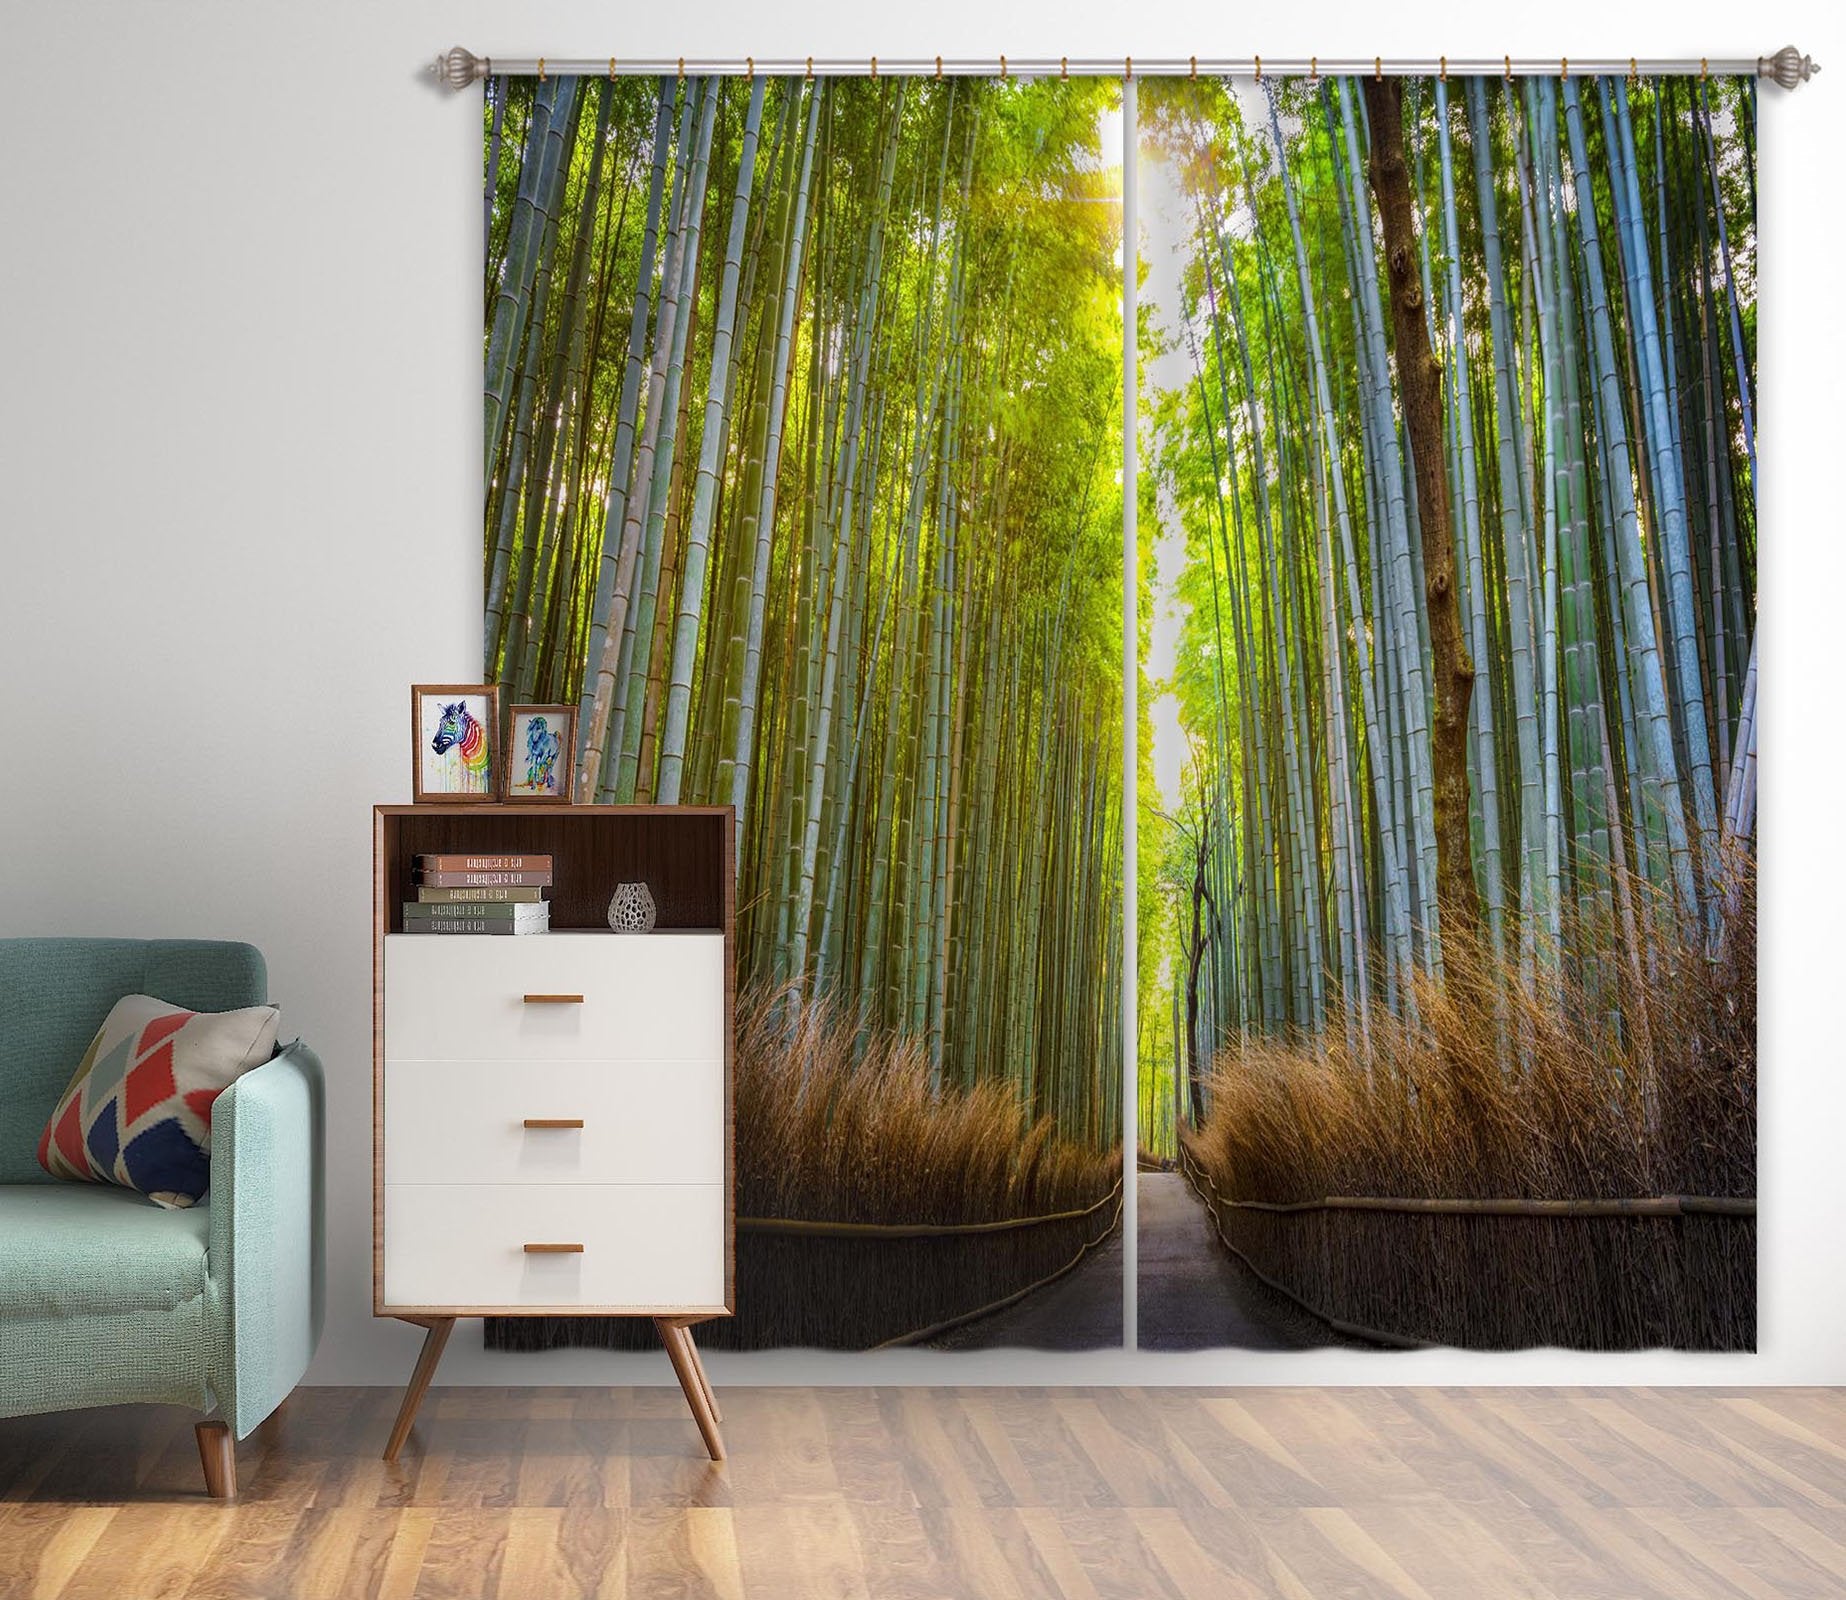 3D Bamboo Forest 079 Marco Carmassi Curtain Curtains Drapes Wallpaper AJ Wallpaper 